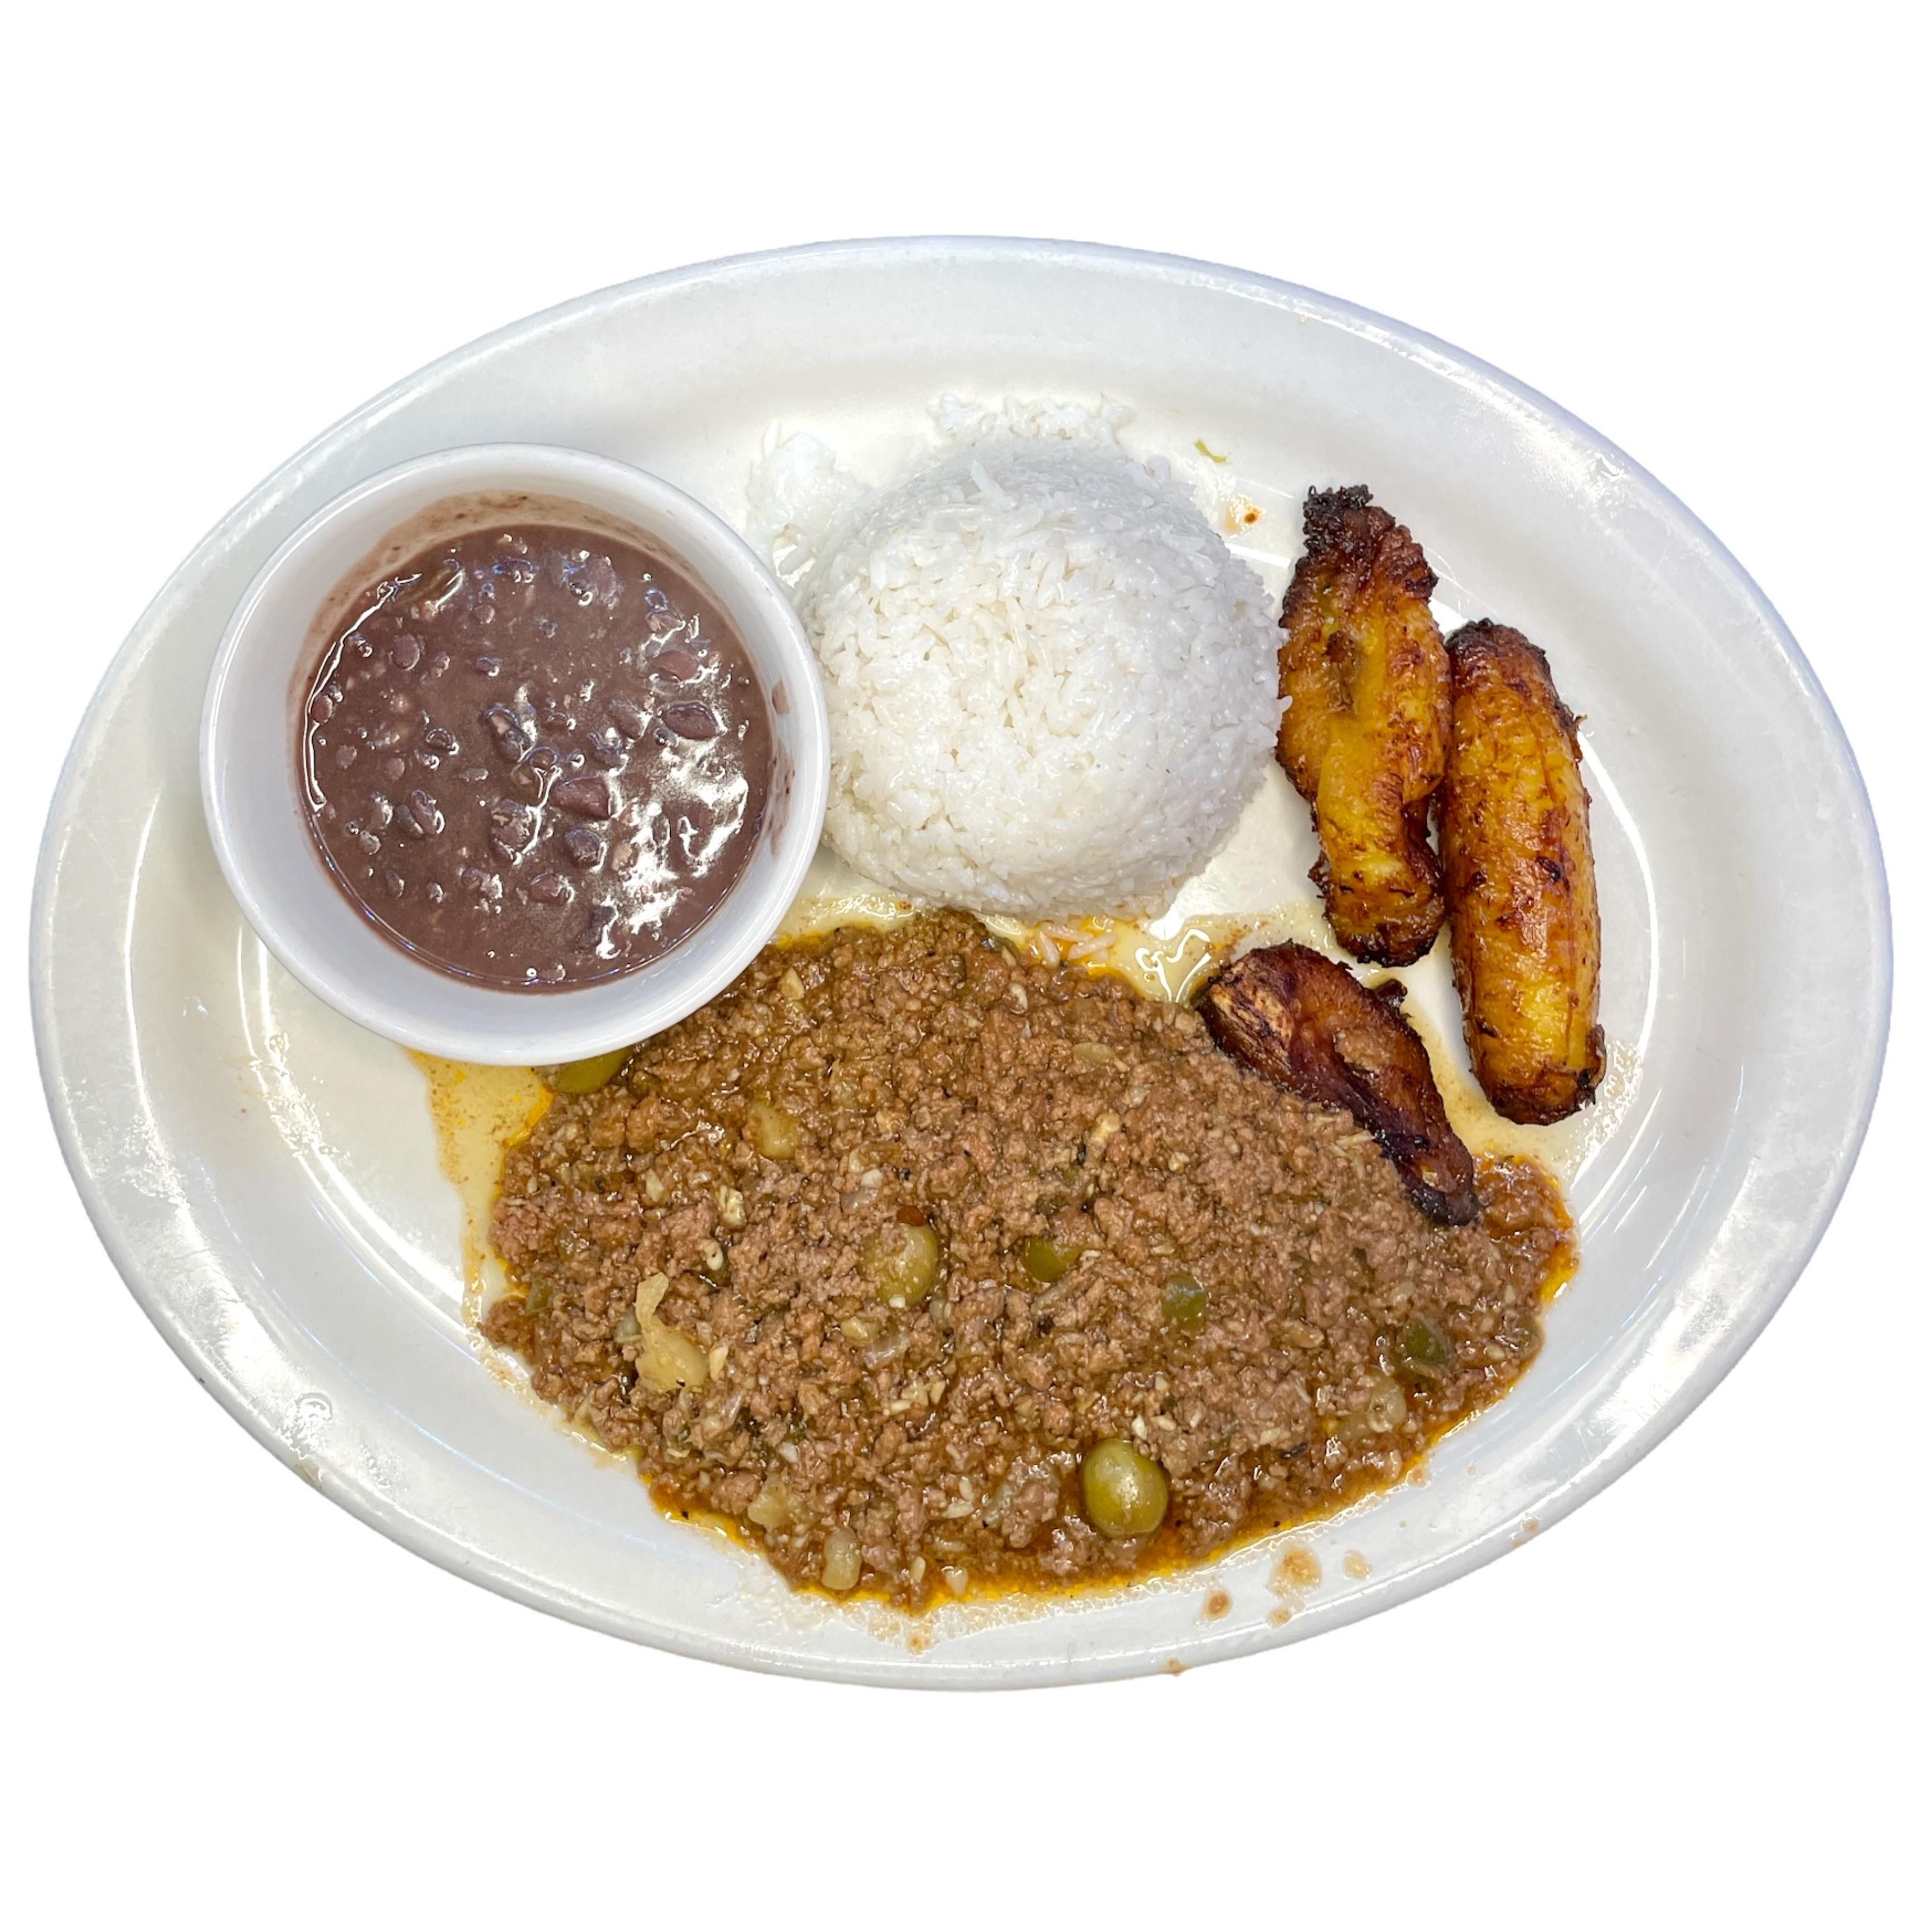 Picadillo Platter - Simple, Traditional